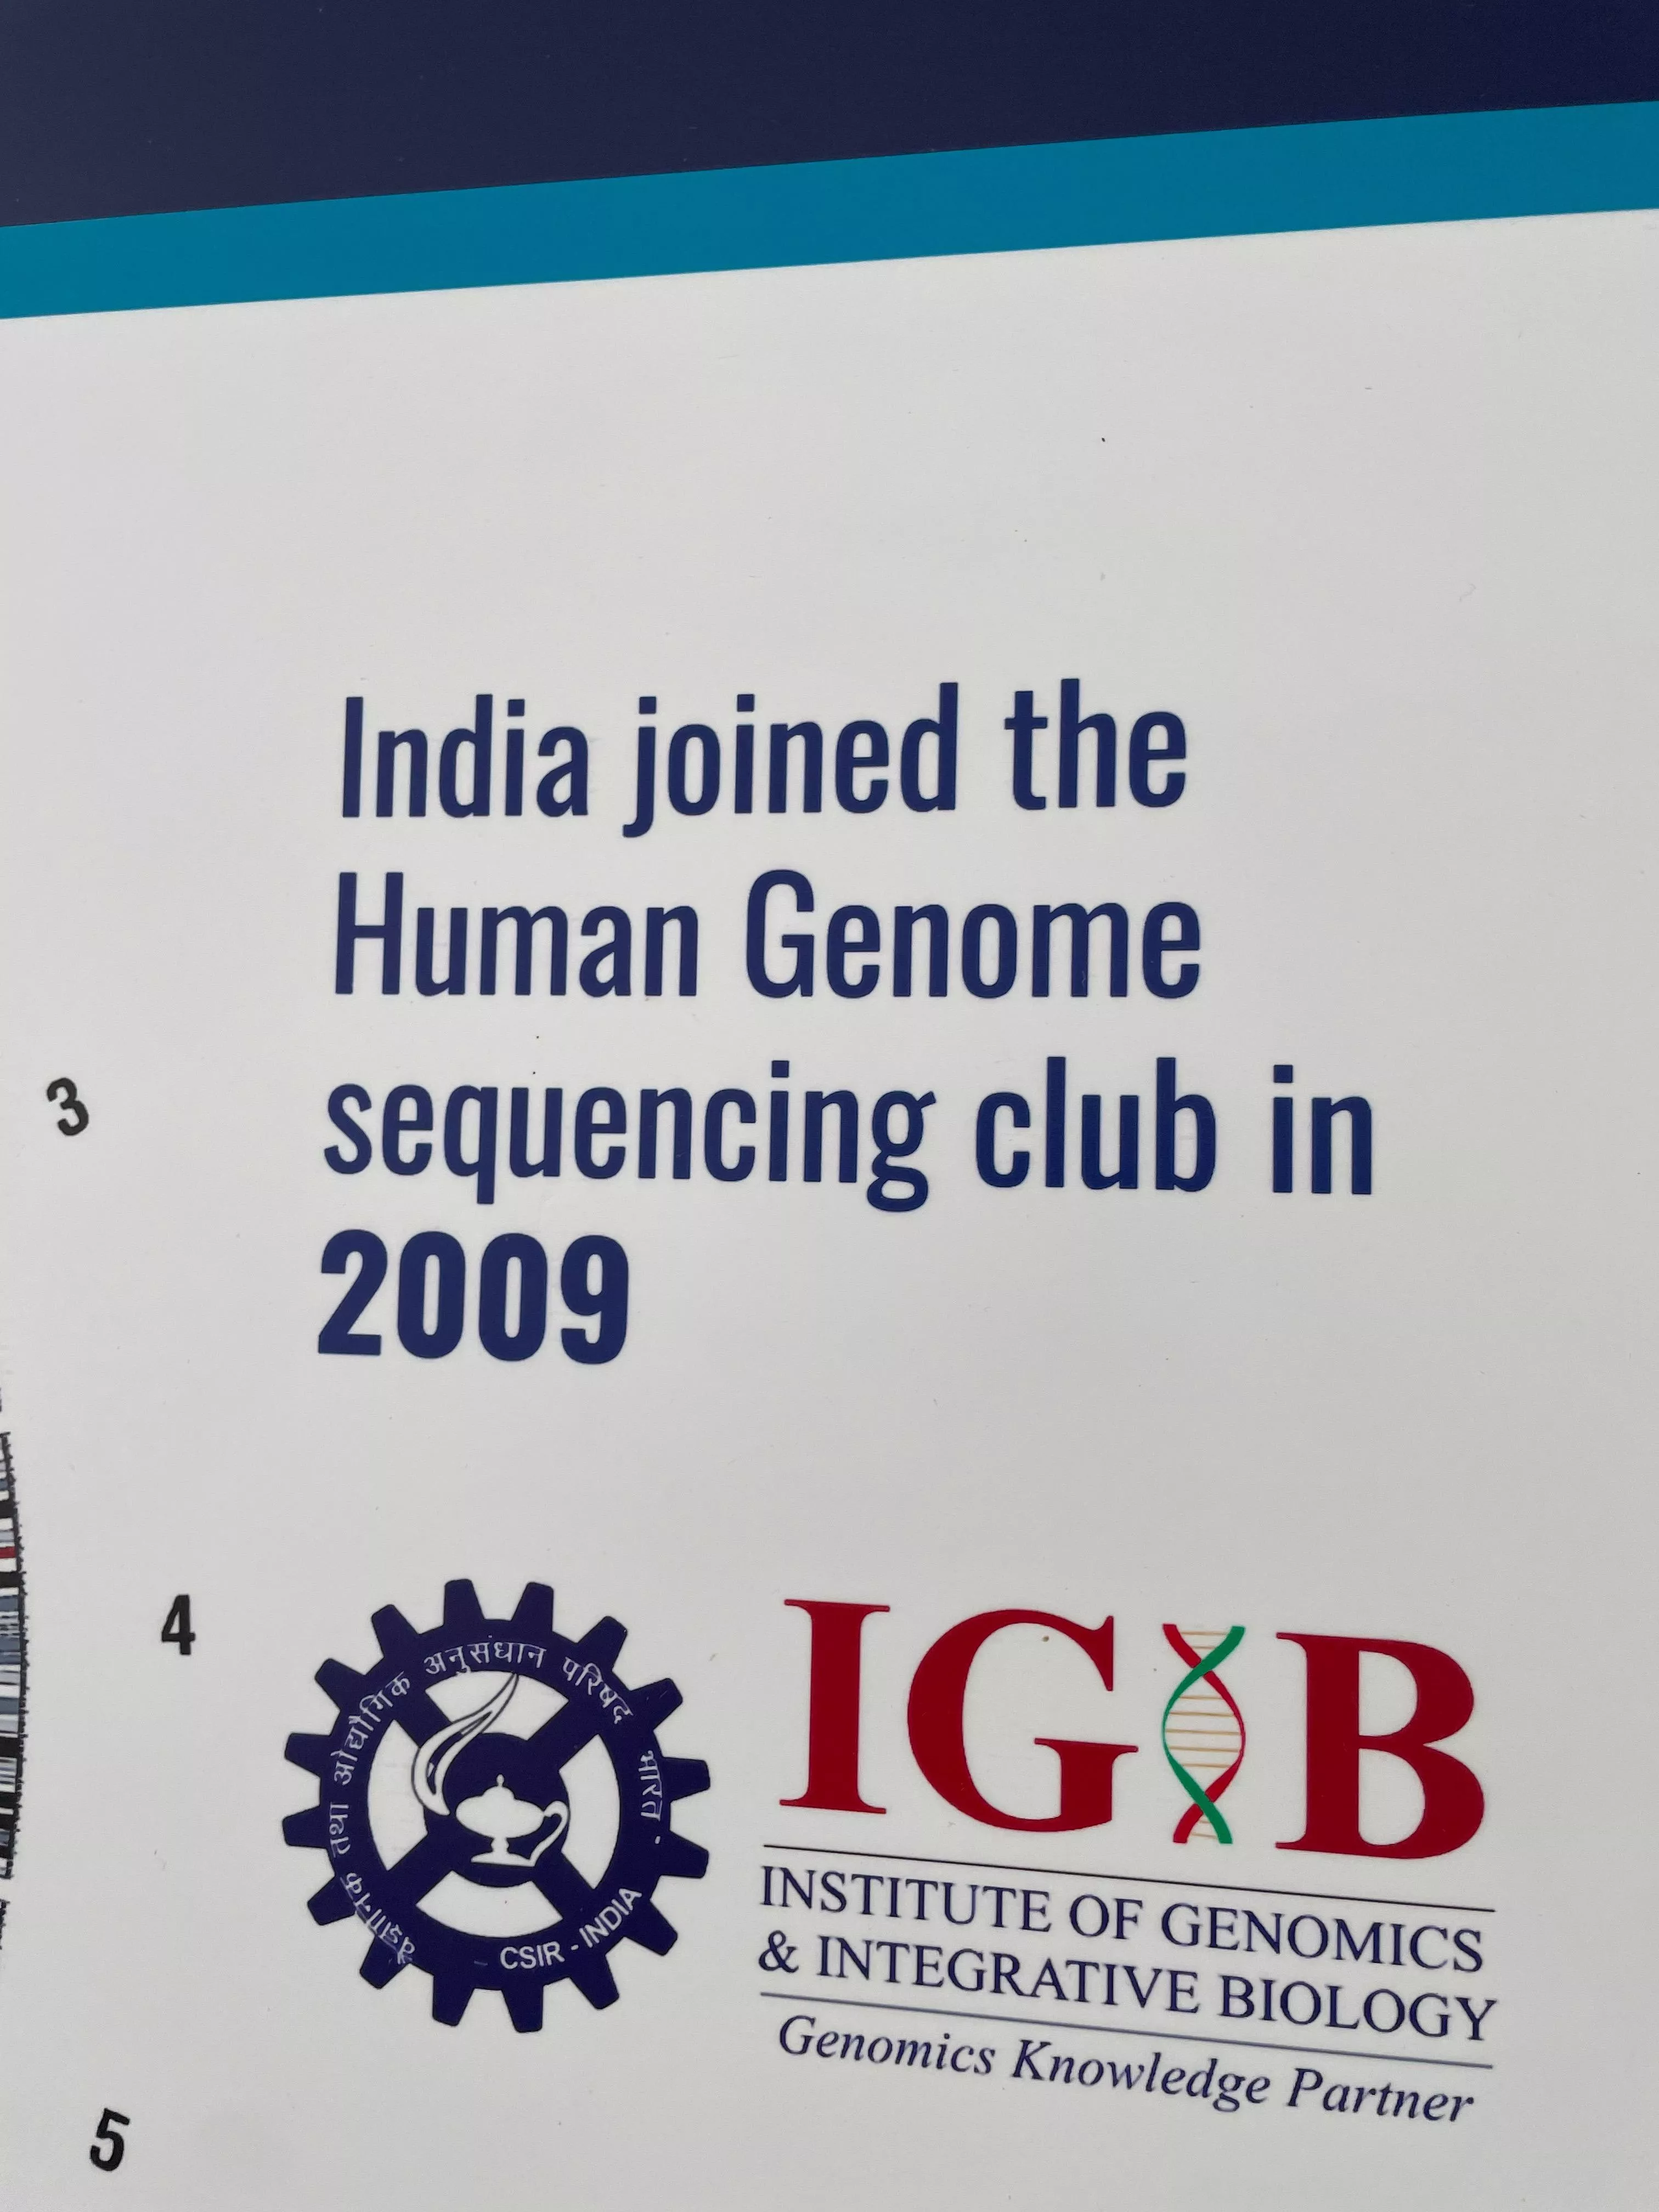 Poster announcing India joining the Human Genome sequencing club